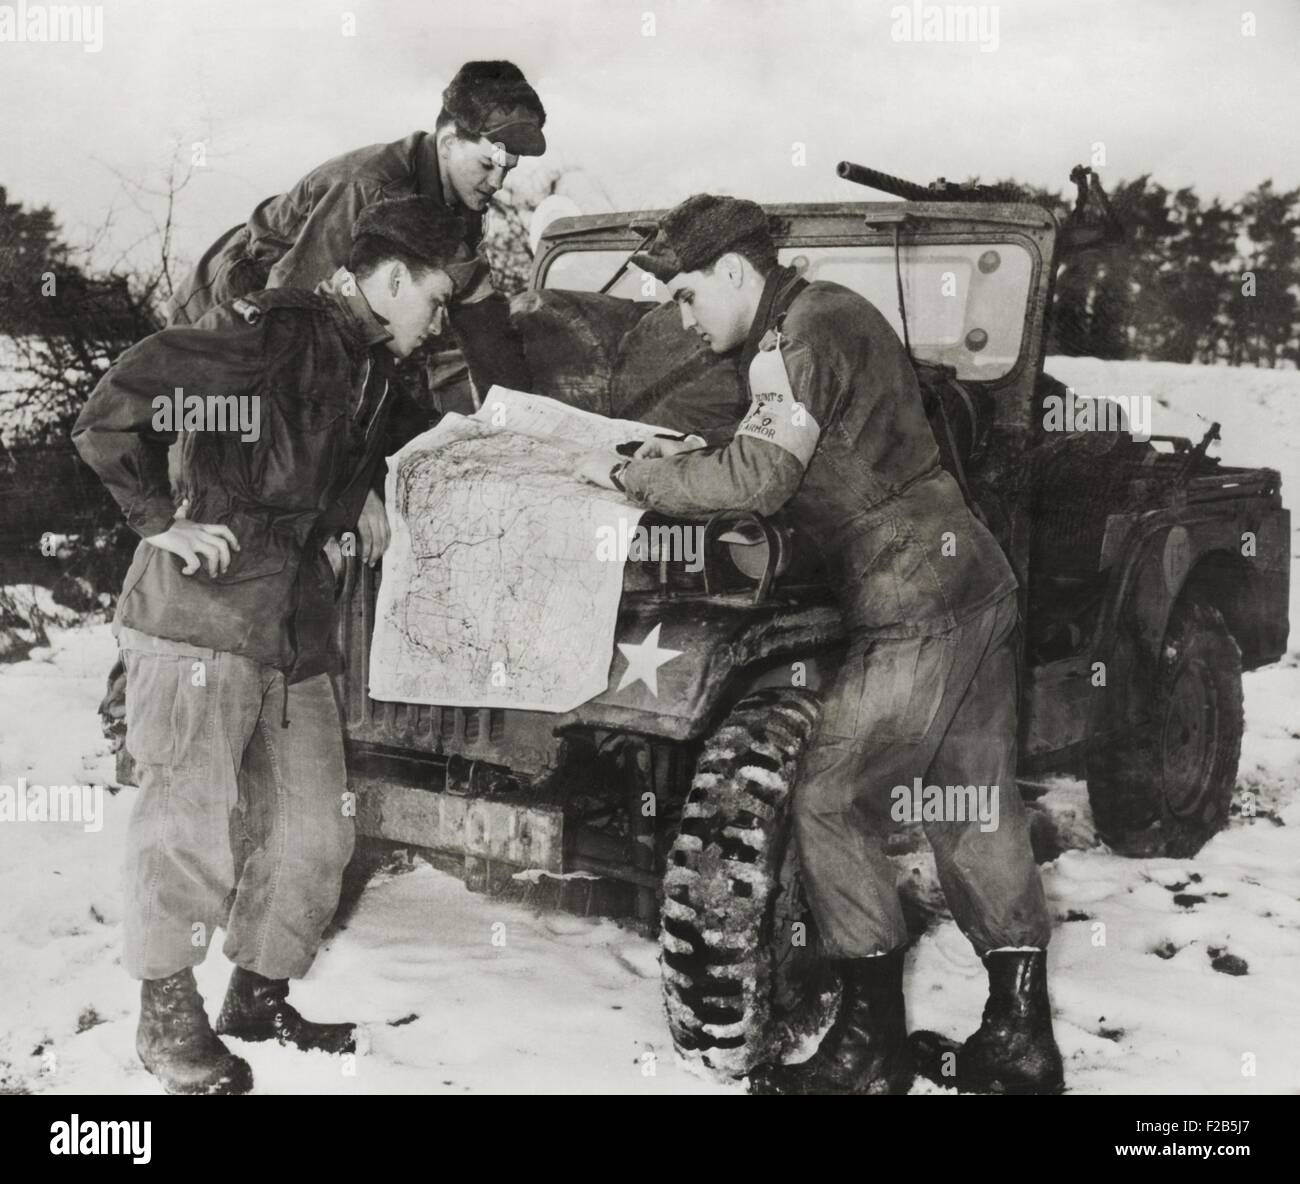 Elvis Presley and other soldiers read a map on maneuvers in Germany. He served with the with 1st Medium Tank Battalion, 3d Armored Division. Ca. 1959 - (BSLOC 2014 17 106) Stock Photo